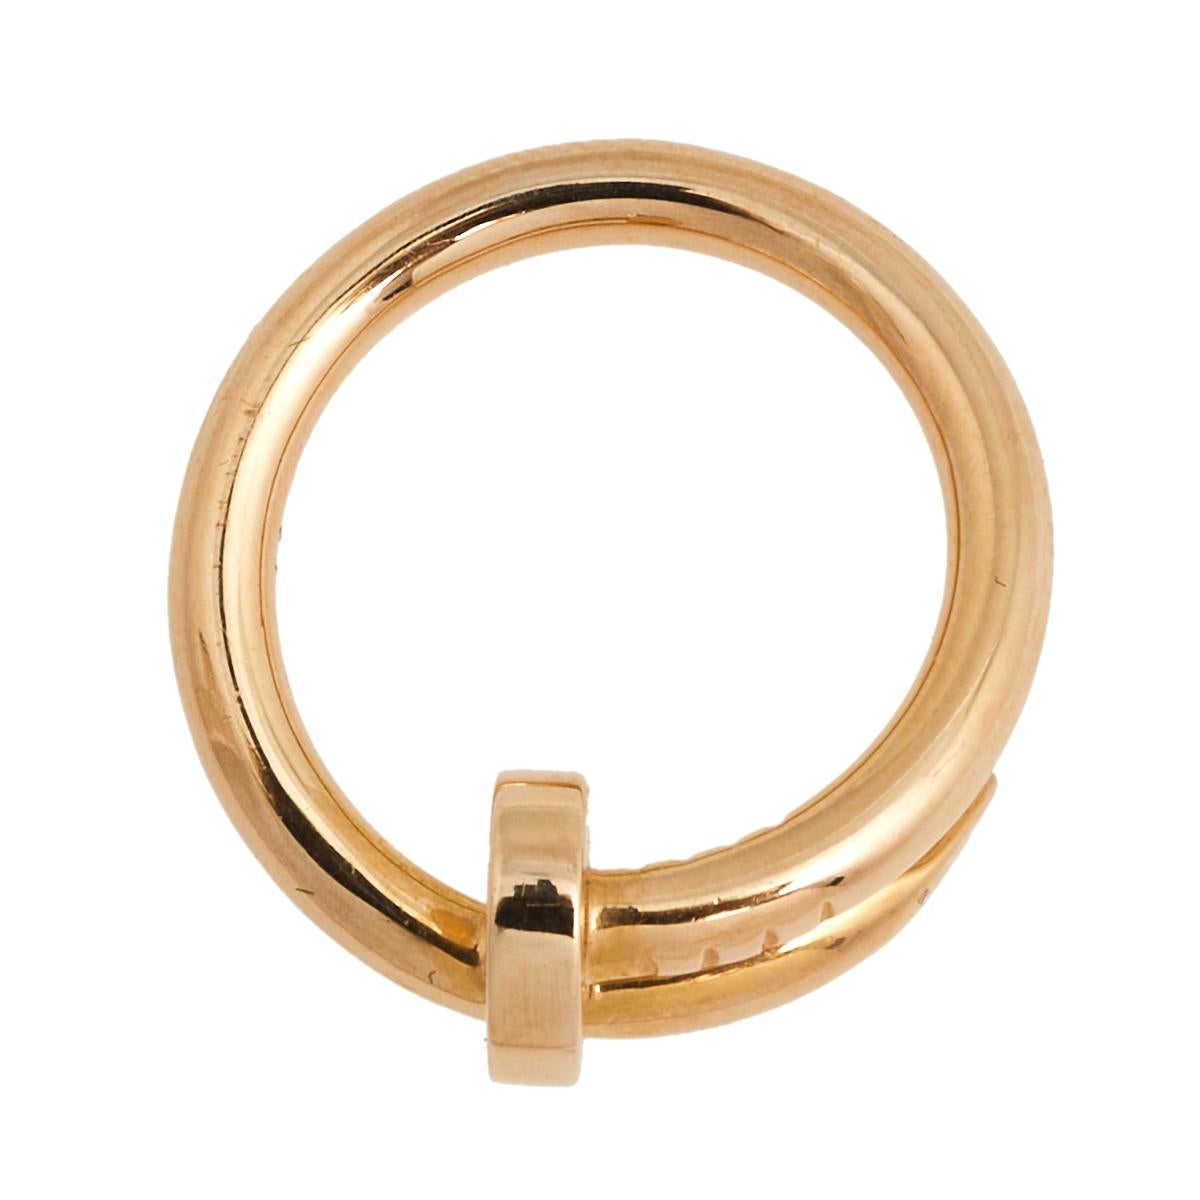 The Juste Un Clou collection from Cartier is all about making ordinary objects into exquisite pieces of jewellery, and it would be fair to say that this piece is truly beyond precious. It is a creation that proudly represents the expertise and